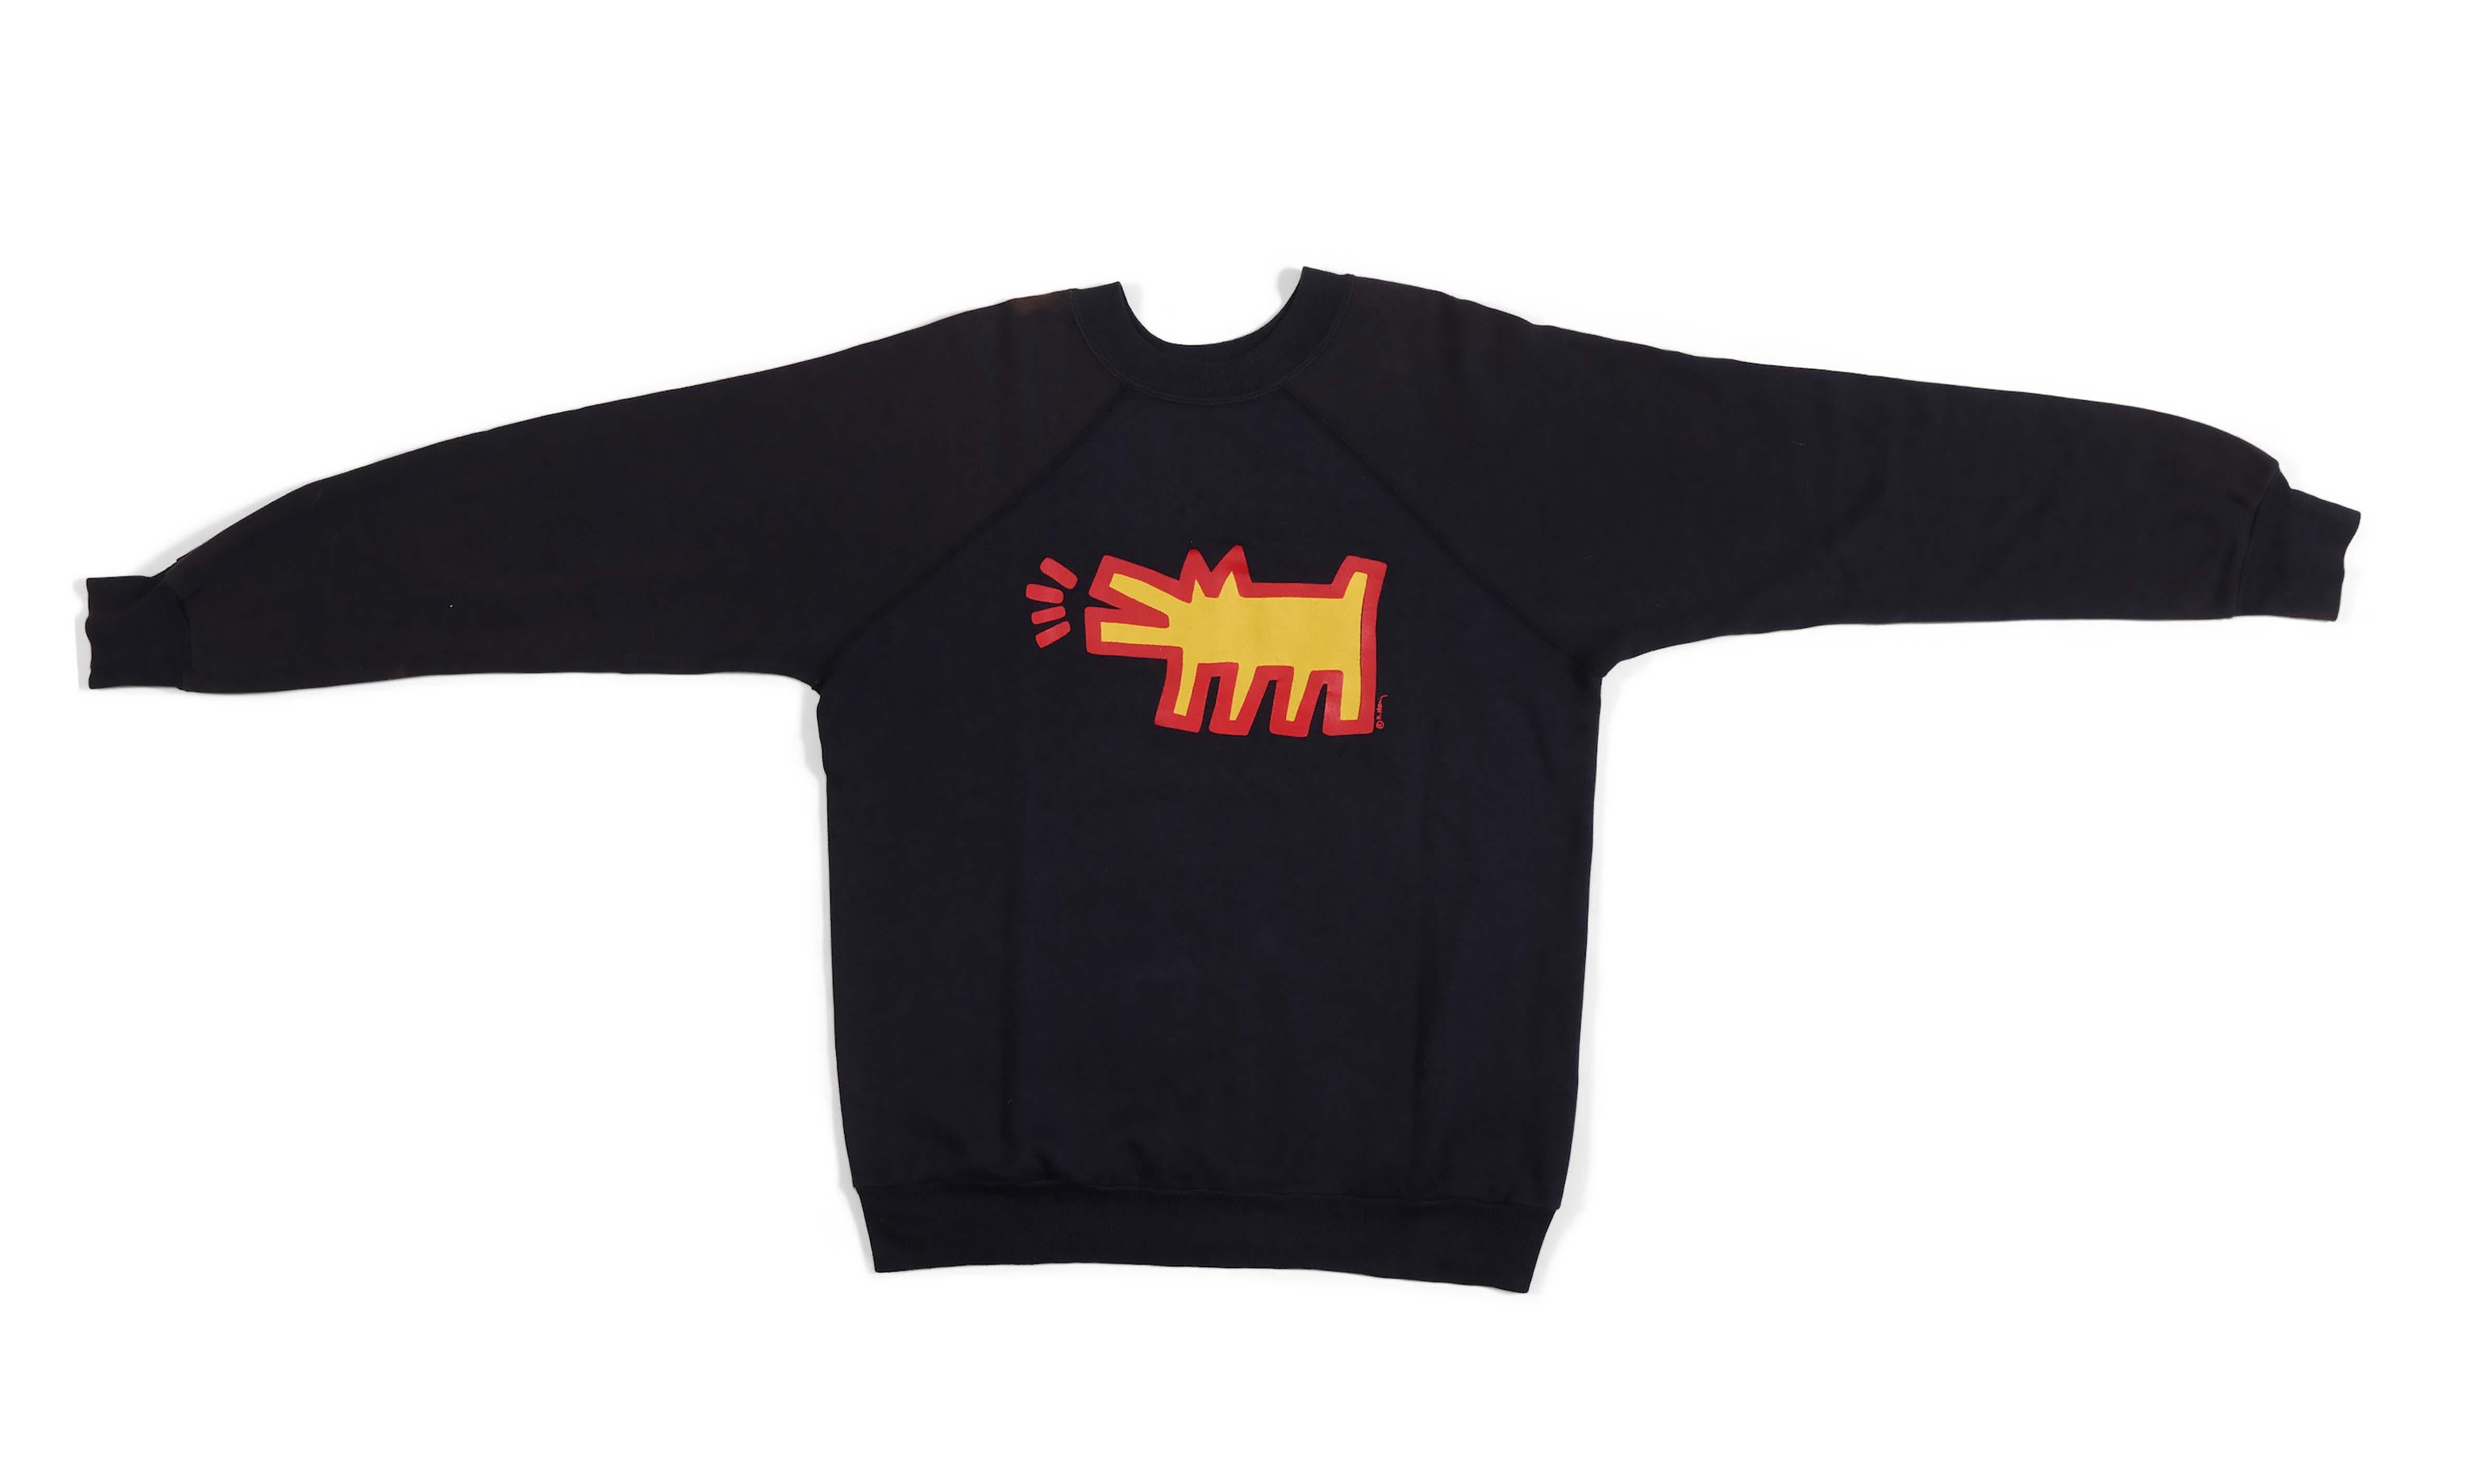 Rare hand-signed Keith Haring Pop Shop sweatshirt circa 1986: 

A much historical hand-signed 1980s Keith Haring Pop Shop collectible produced during the early days of the famed Haring Pop Shop. The sweatshirt features Haring's Radiant Baby &